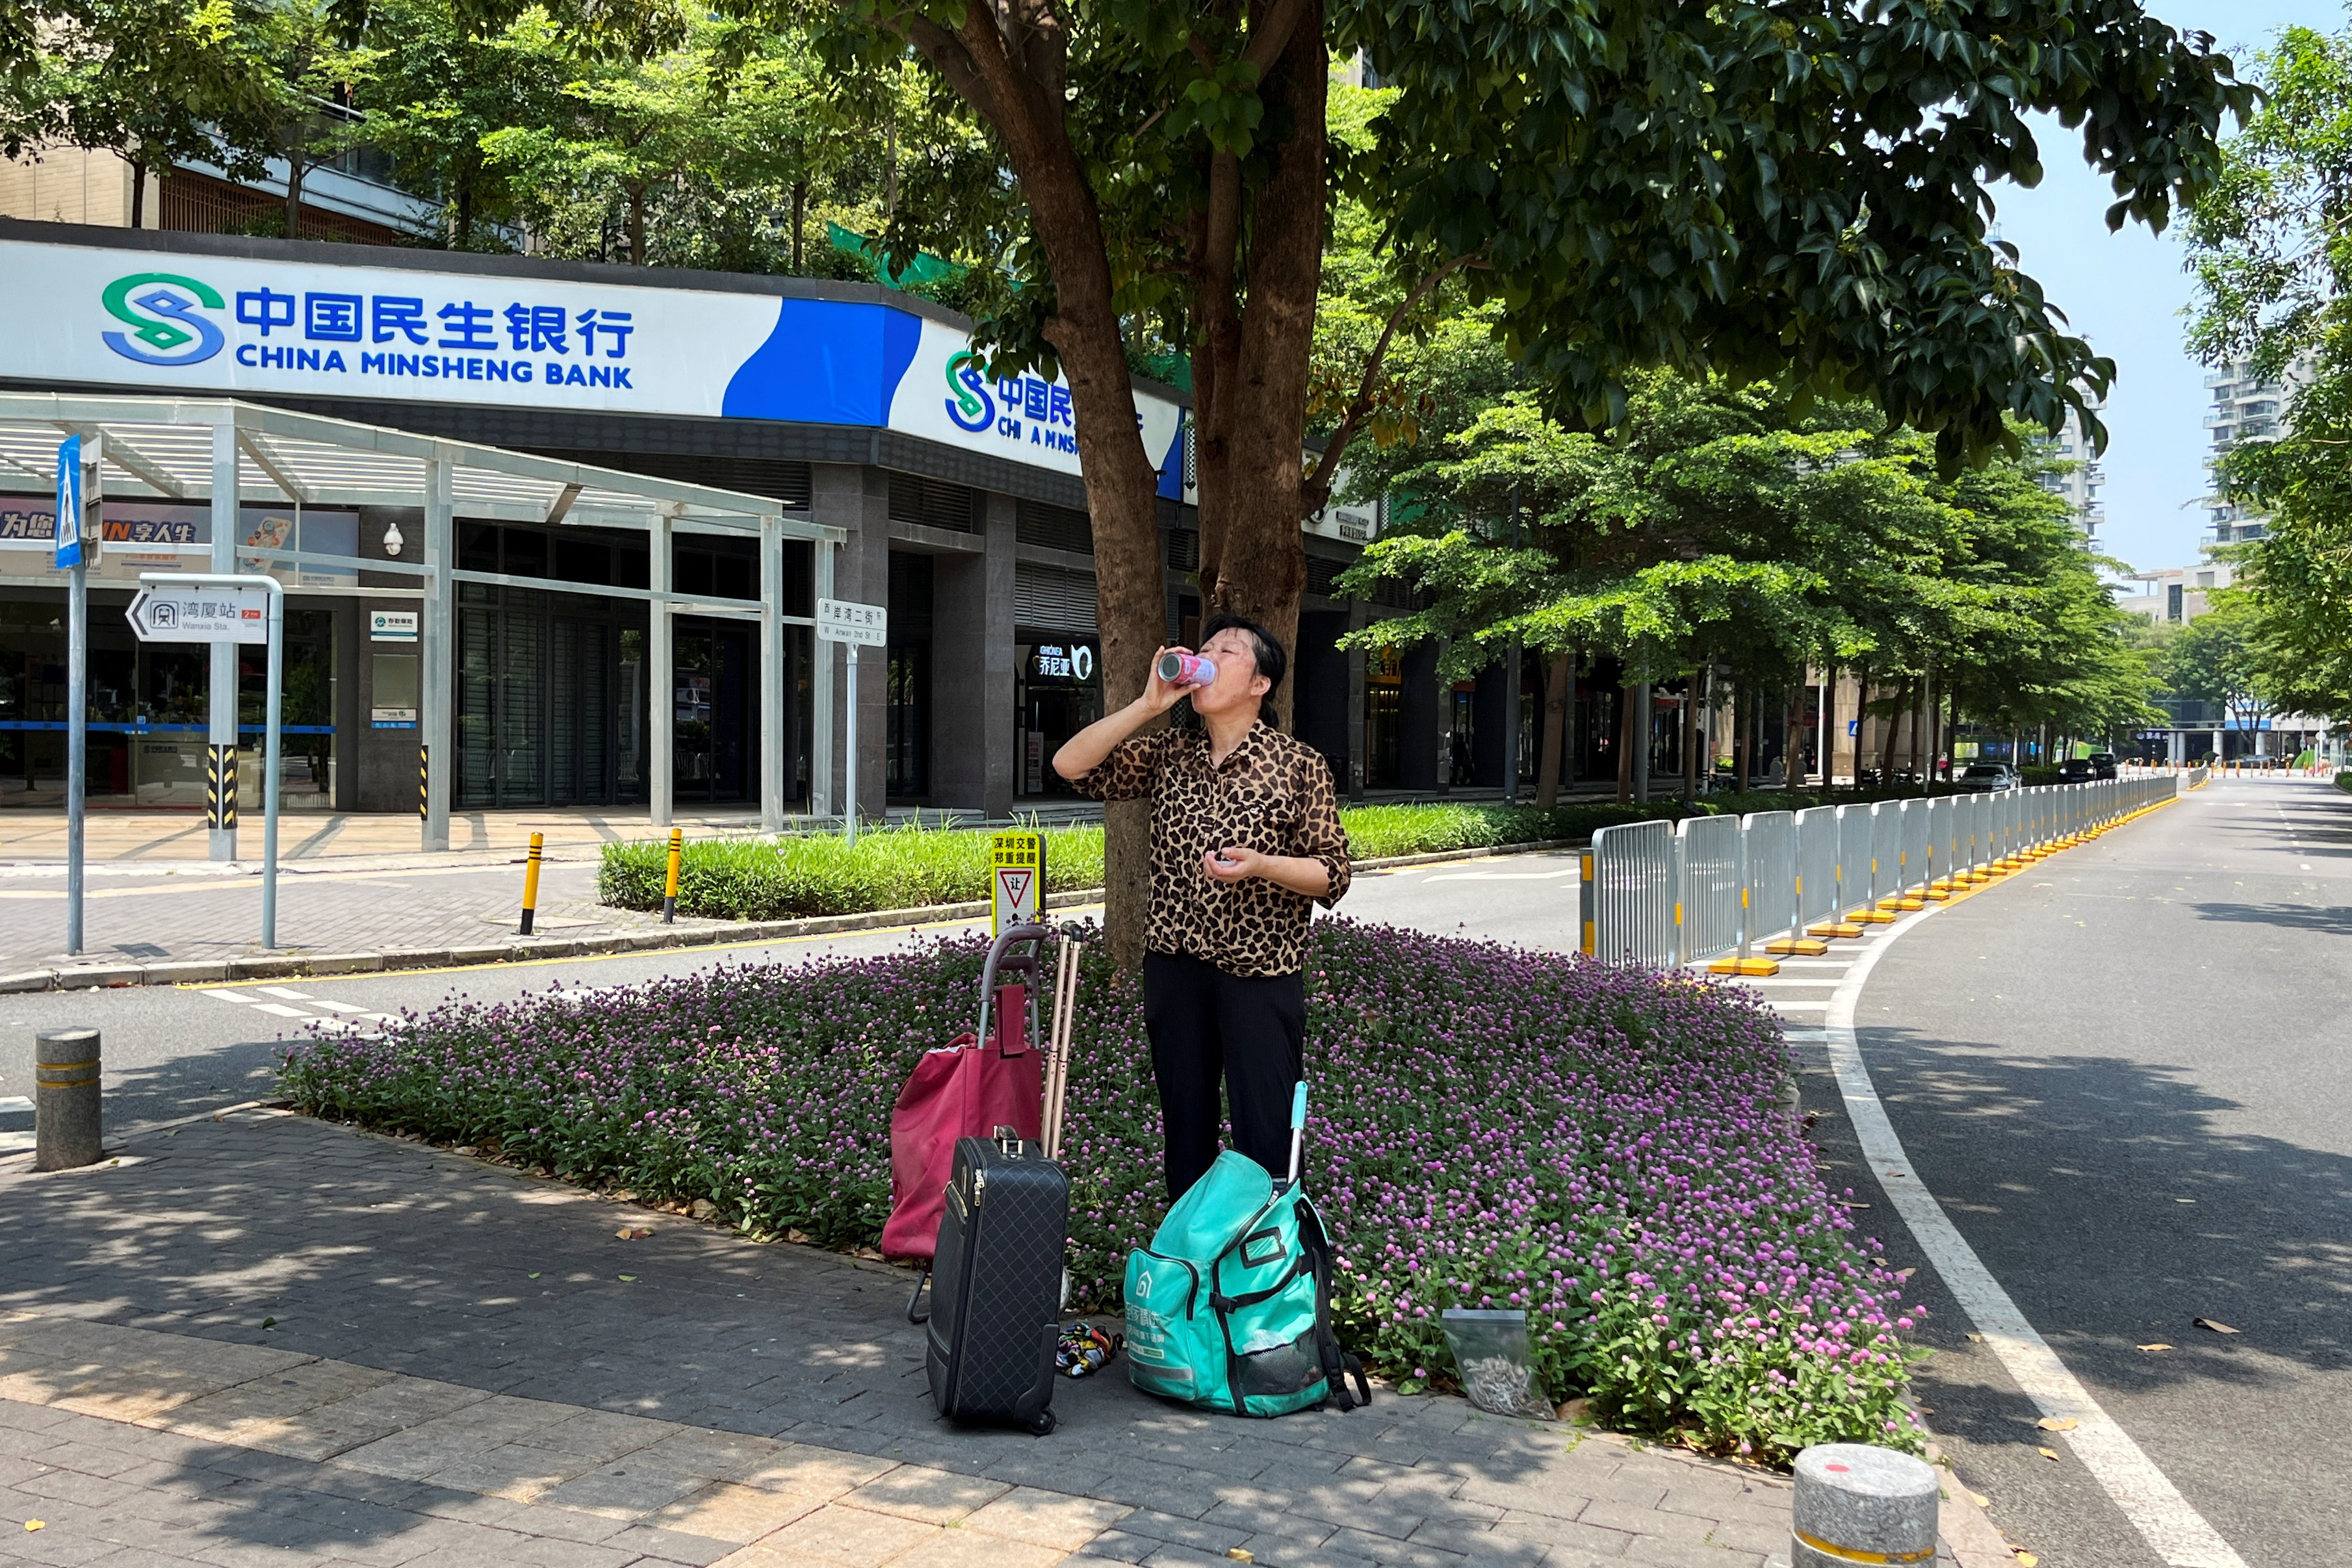 A woman standing under a tree drinks from a can amid a yellow alert for heatwave in Shenzhen